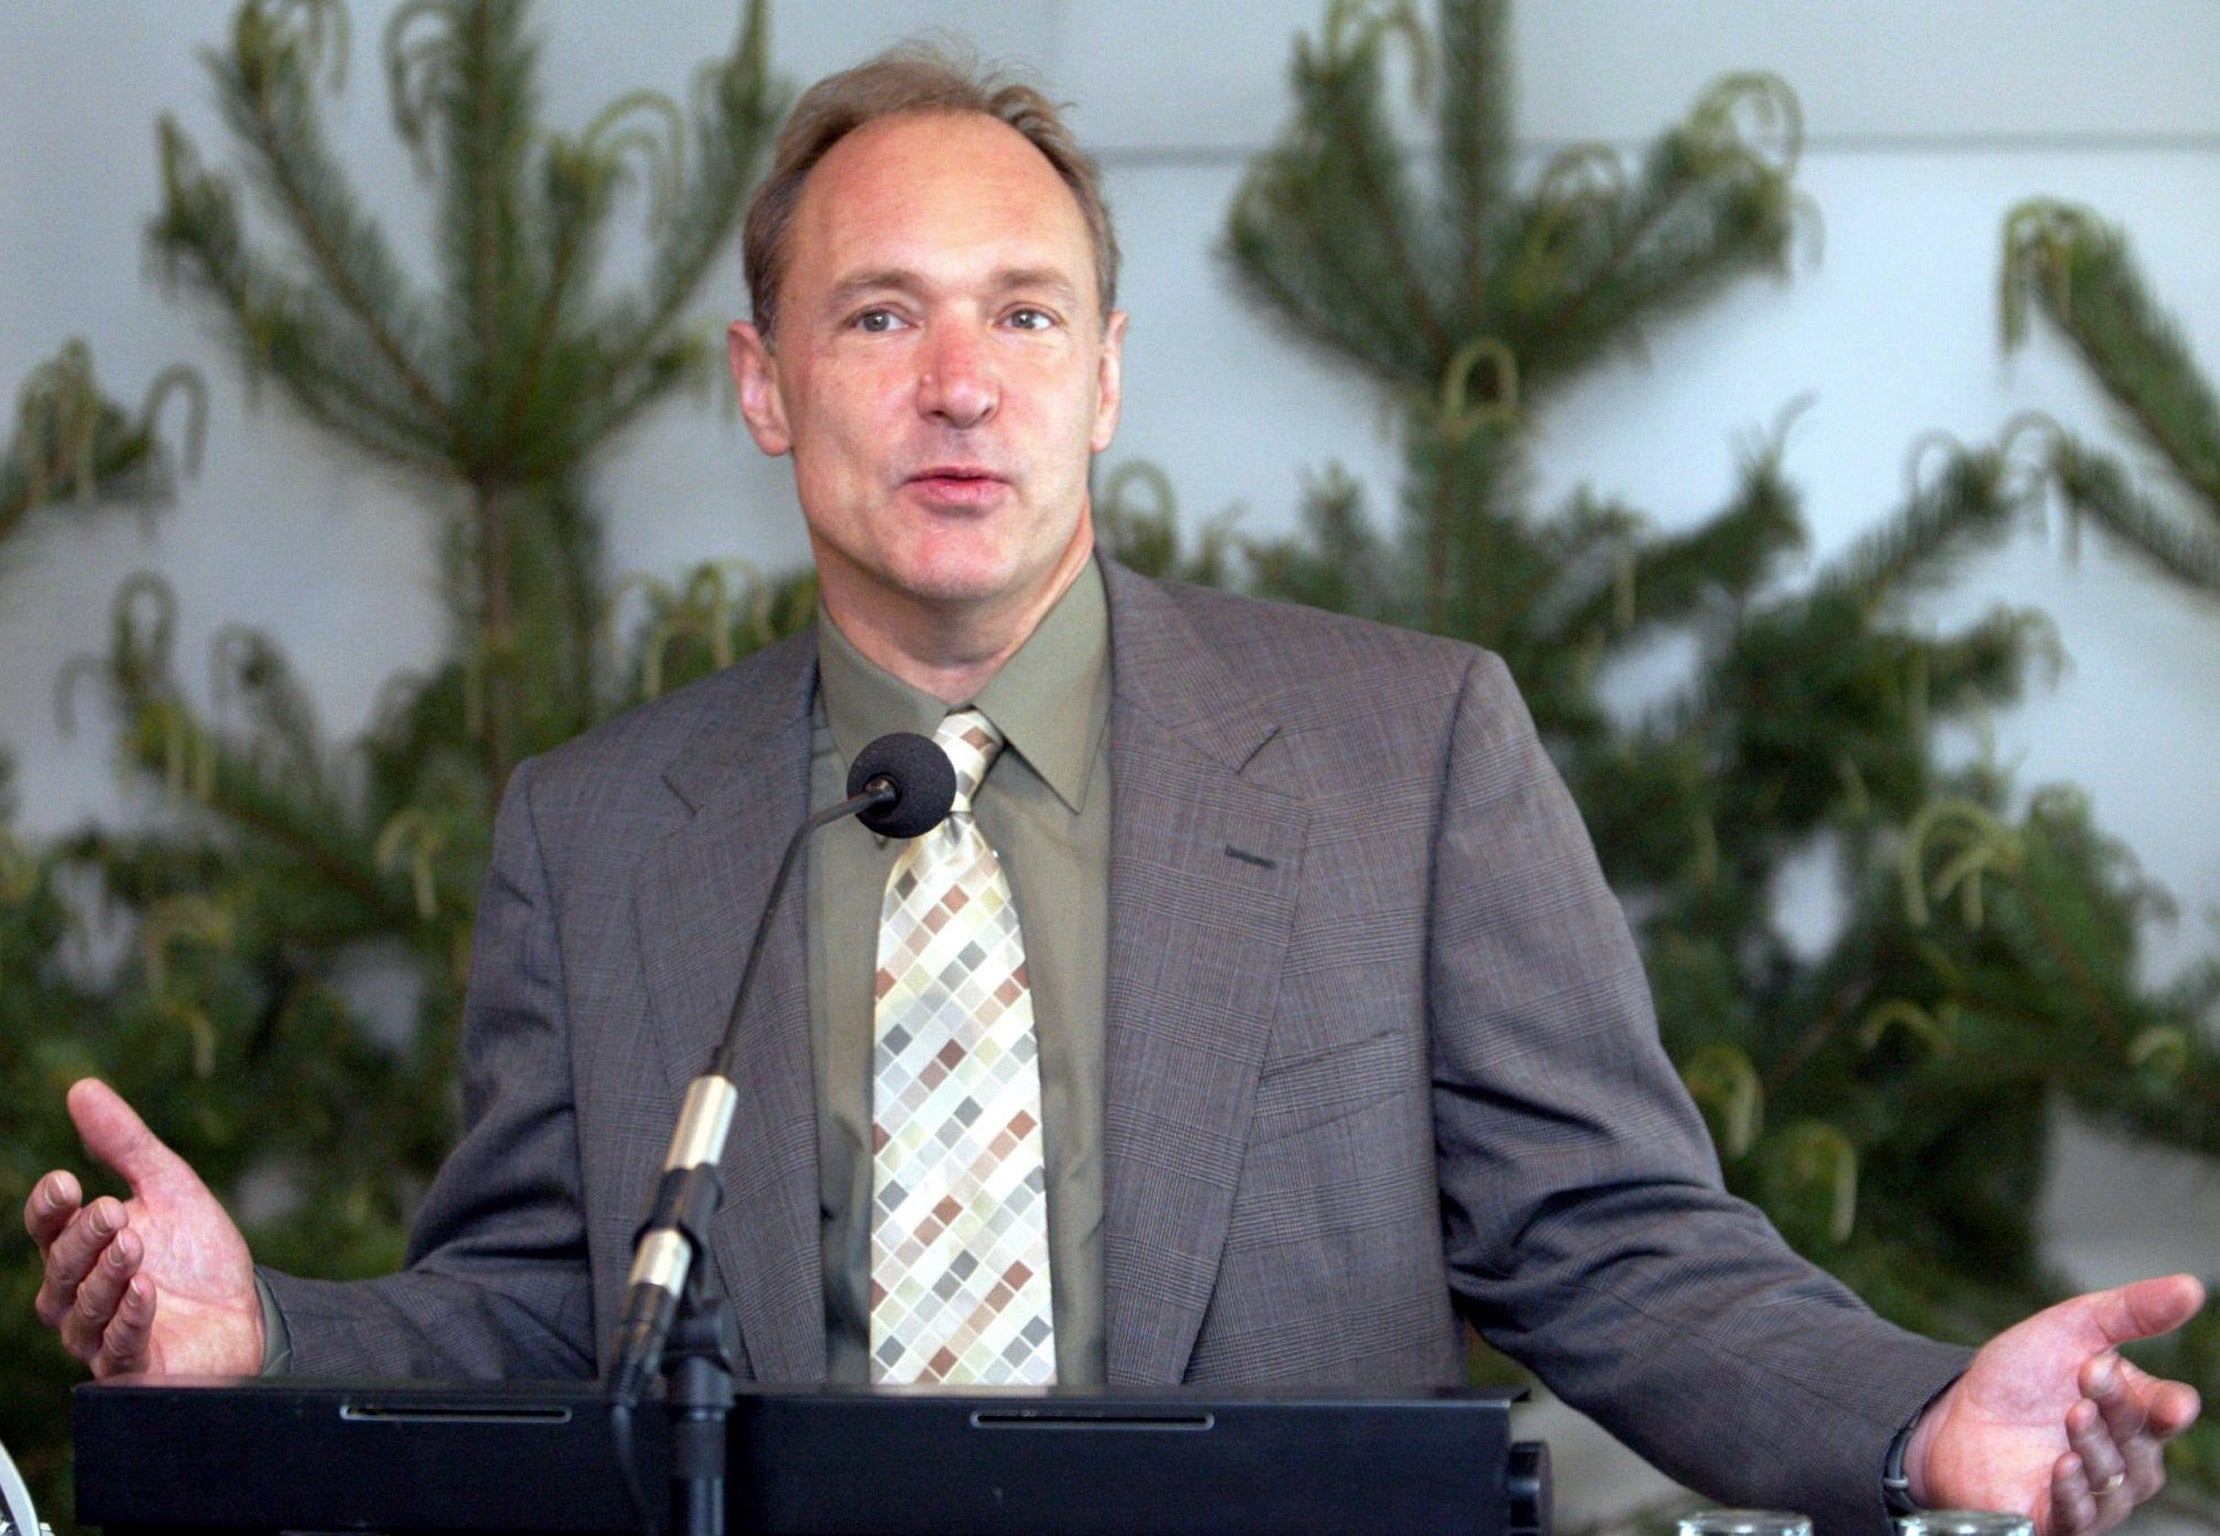 Sir Tim Berners-Lee speaks after receiving the first ever Millennium Technology Prize in Helsinki in 2004